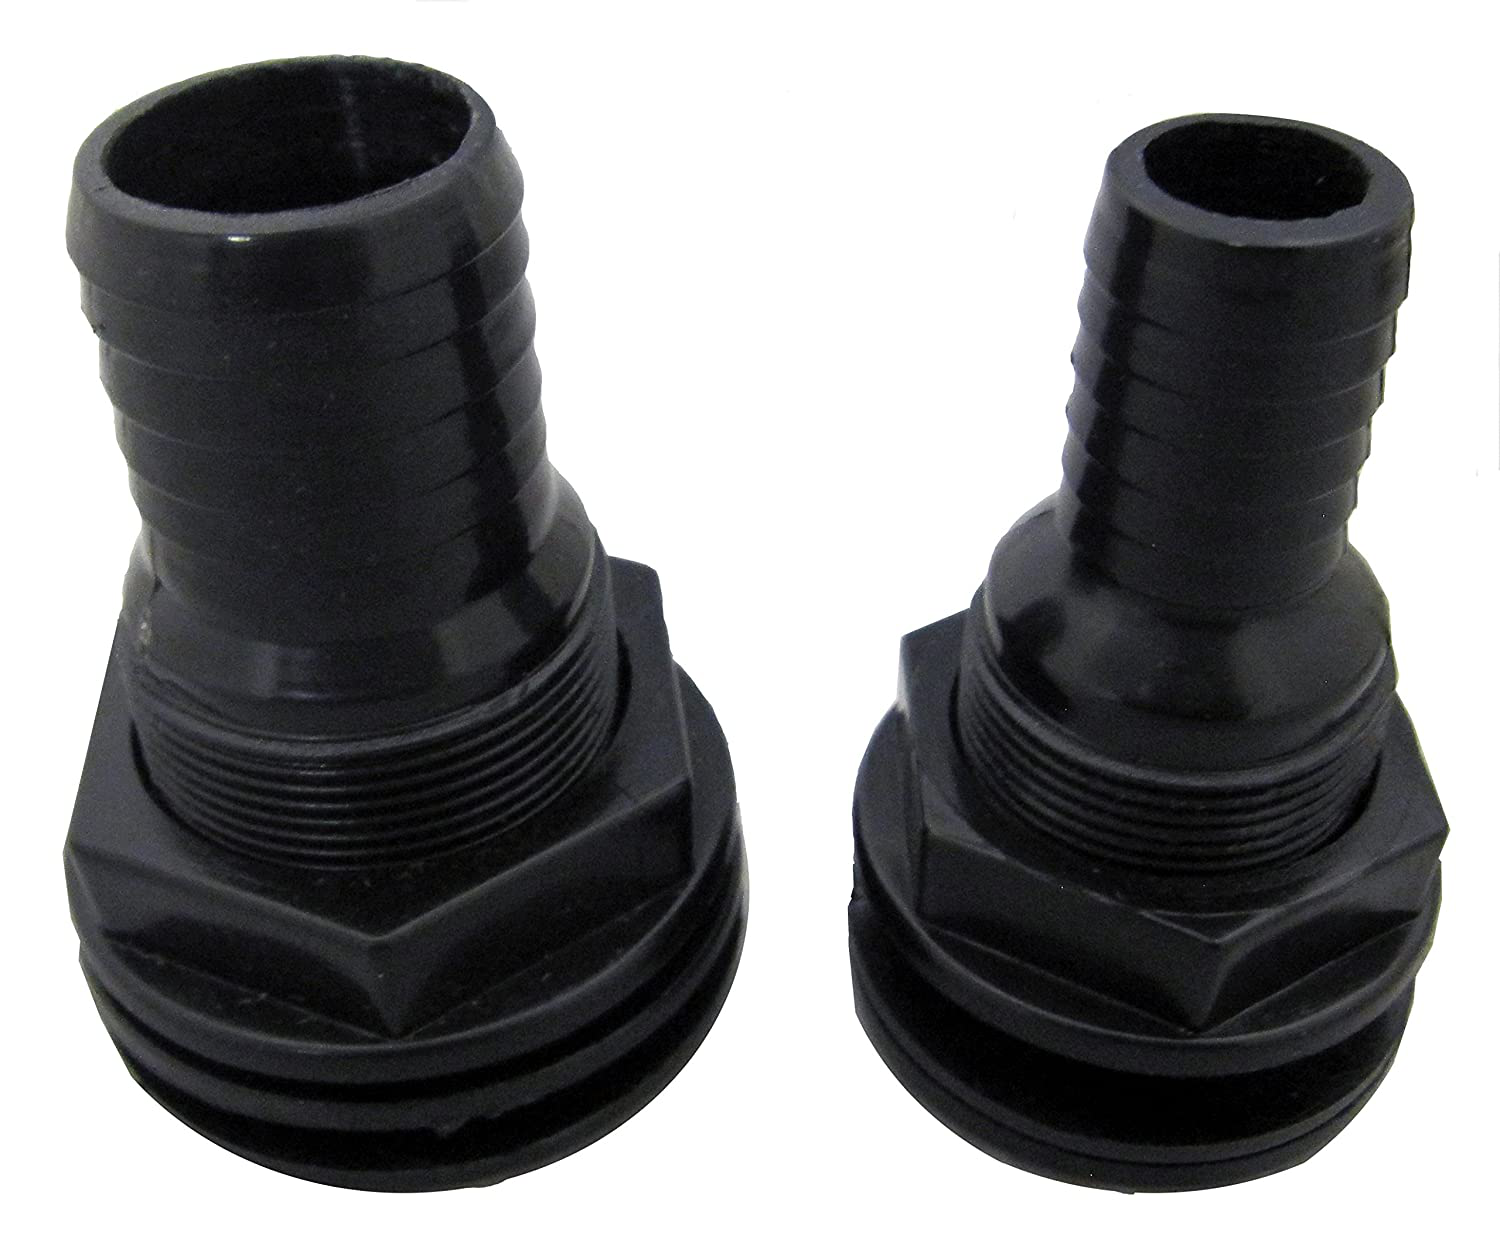 Drain & Return Combo [1] 1" Slip (Pipe Size) X 1.25" Barbed (Hose/Tubing Size) Bulkhead (Requires 1" 3/4" Hole Diameter) + [1] 3/4" Slip X Barbed Bulkhead (Requires 1" 1/2" Hole Diameter) Animals & Pet Supplies > Pet Supplies > Fish Supplies > Aquarium & Pond Tubing Encompass All   